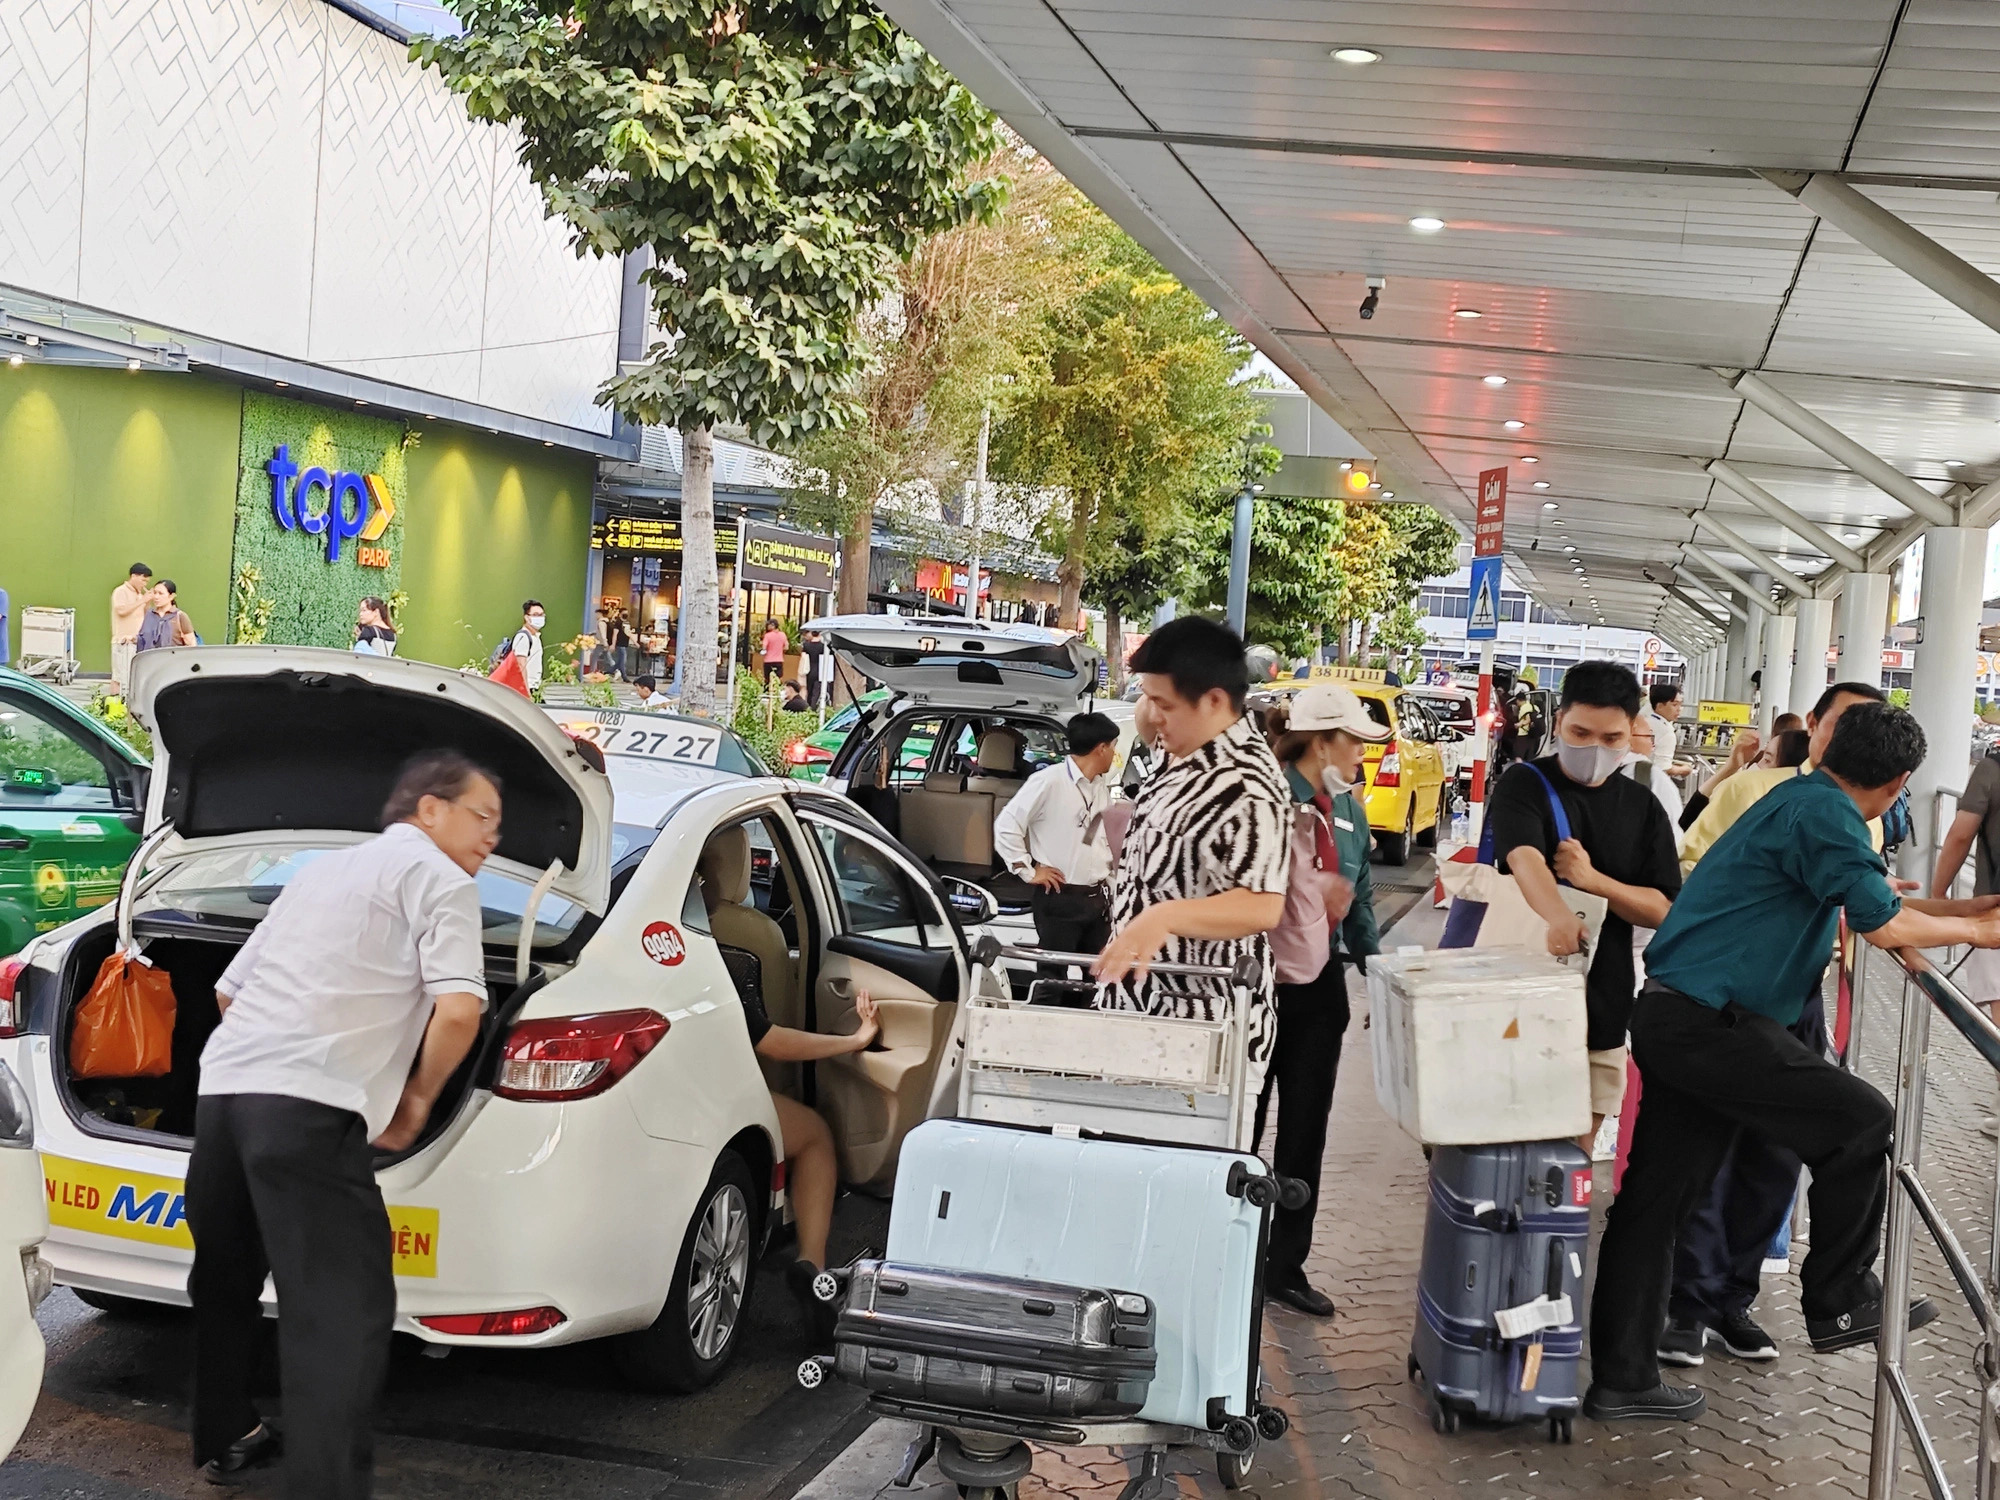 Taxi services at Tan Son Nhat Airport are supervised by competent agencies to avoid inappropriate business practices such as offering services at exorbitant prices, and refusing low-paying rides. Photo: Cong Trung / Tuoi Tre